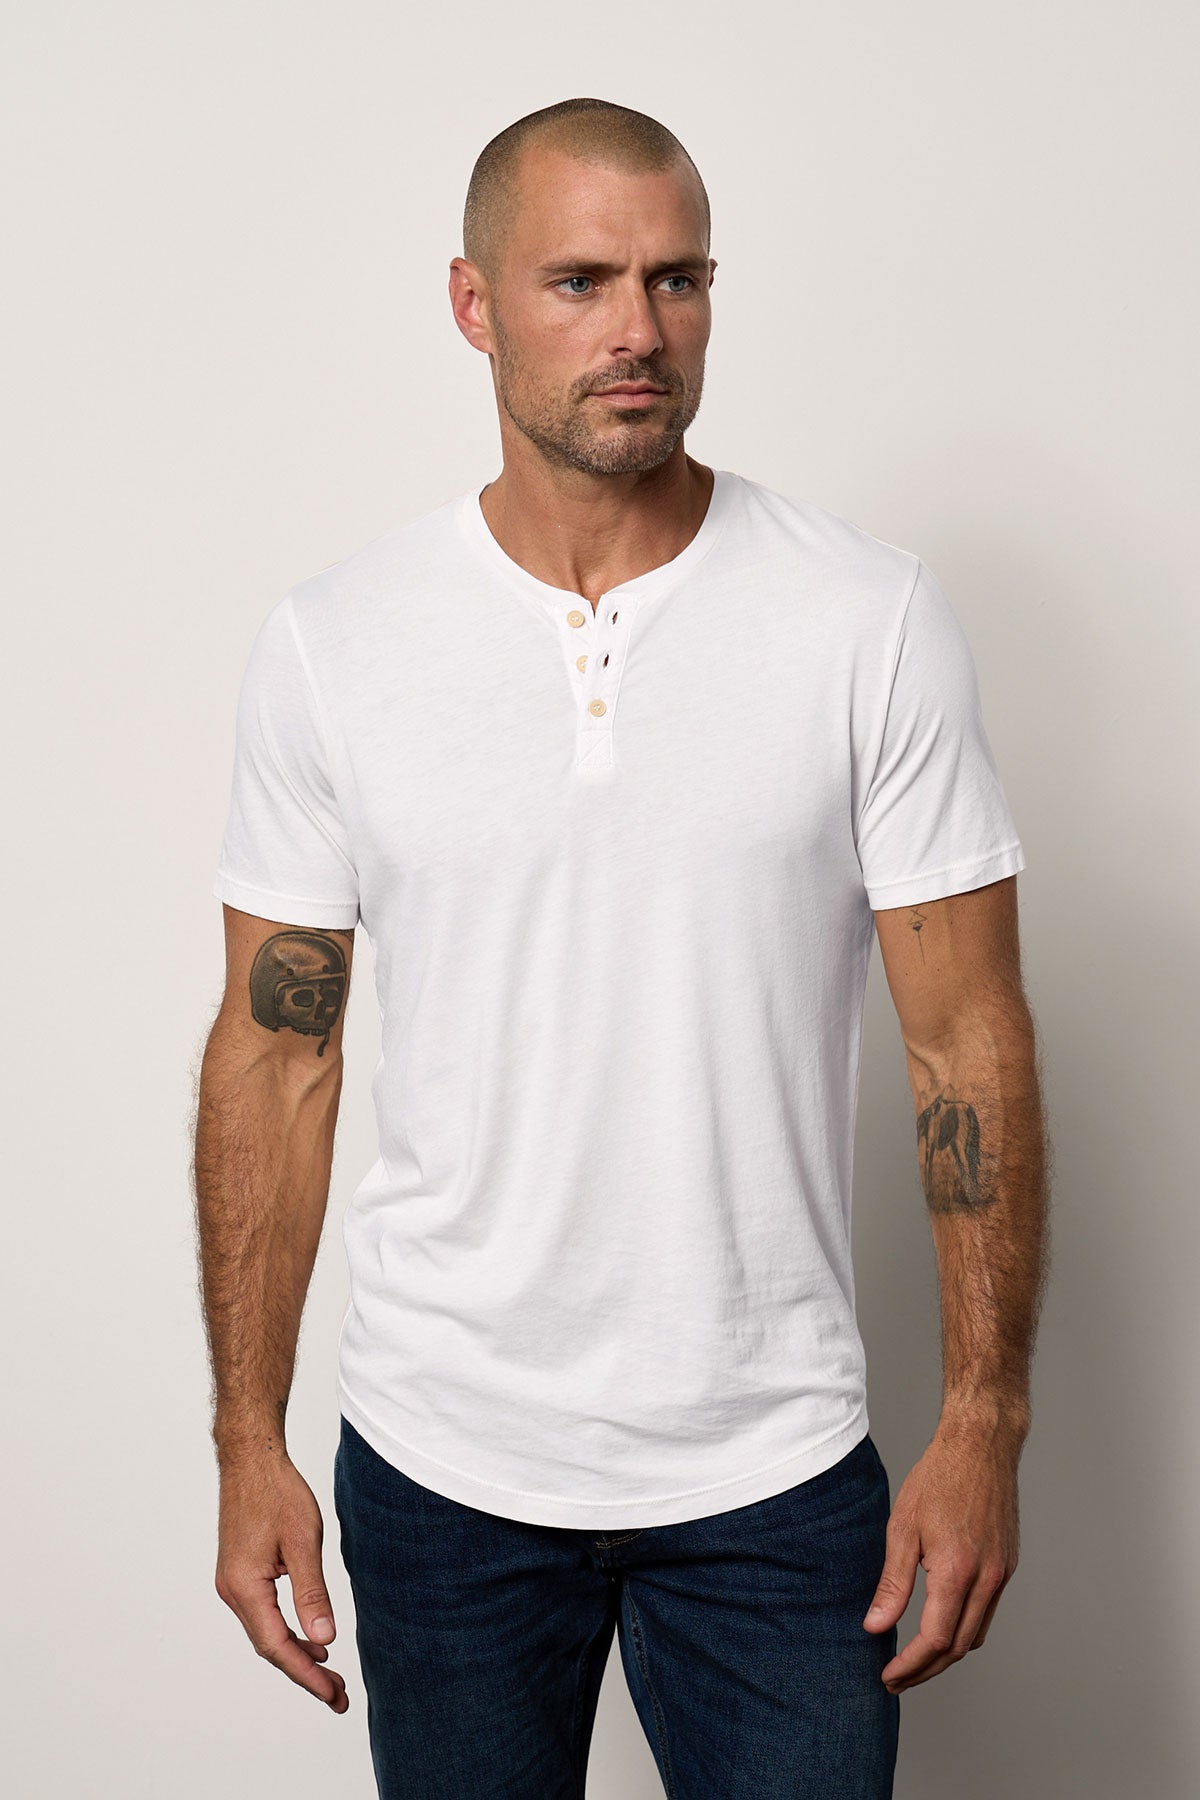   A man with a shaved head and tattoos on his arms, wearing a white Velvet by Graham & Spencer FULTON HENLEY tee, stands facing the camera with a neutral expression. 